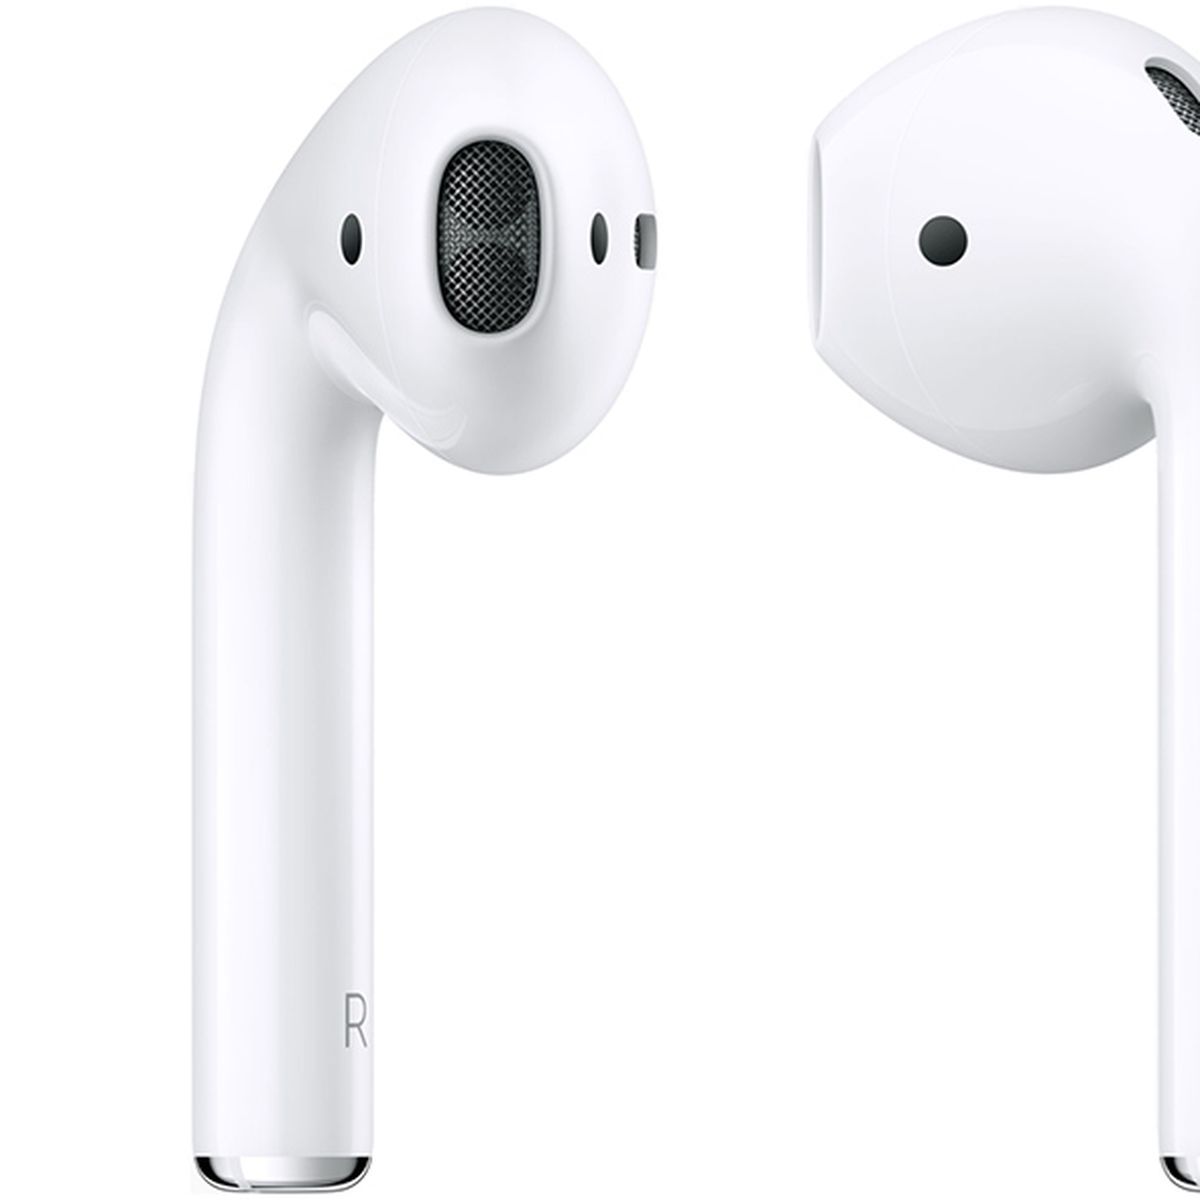 you are sew stitch Apple Sending Replacement AirPods With Unreleased Firmware, Rendering Them  Unusable - MacRumors